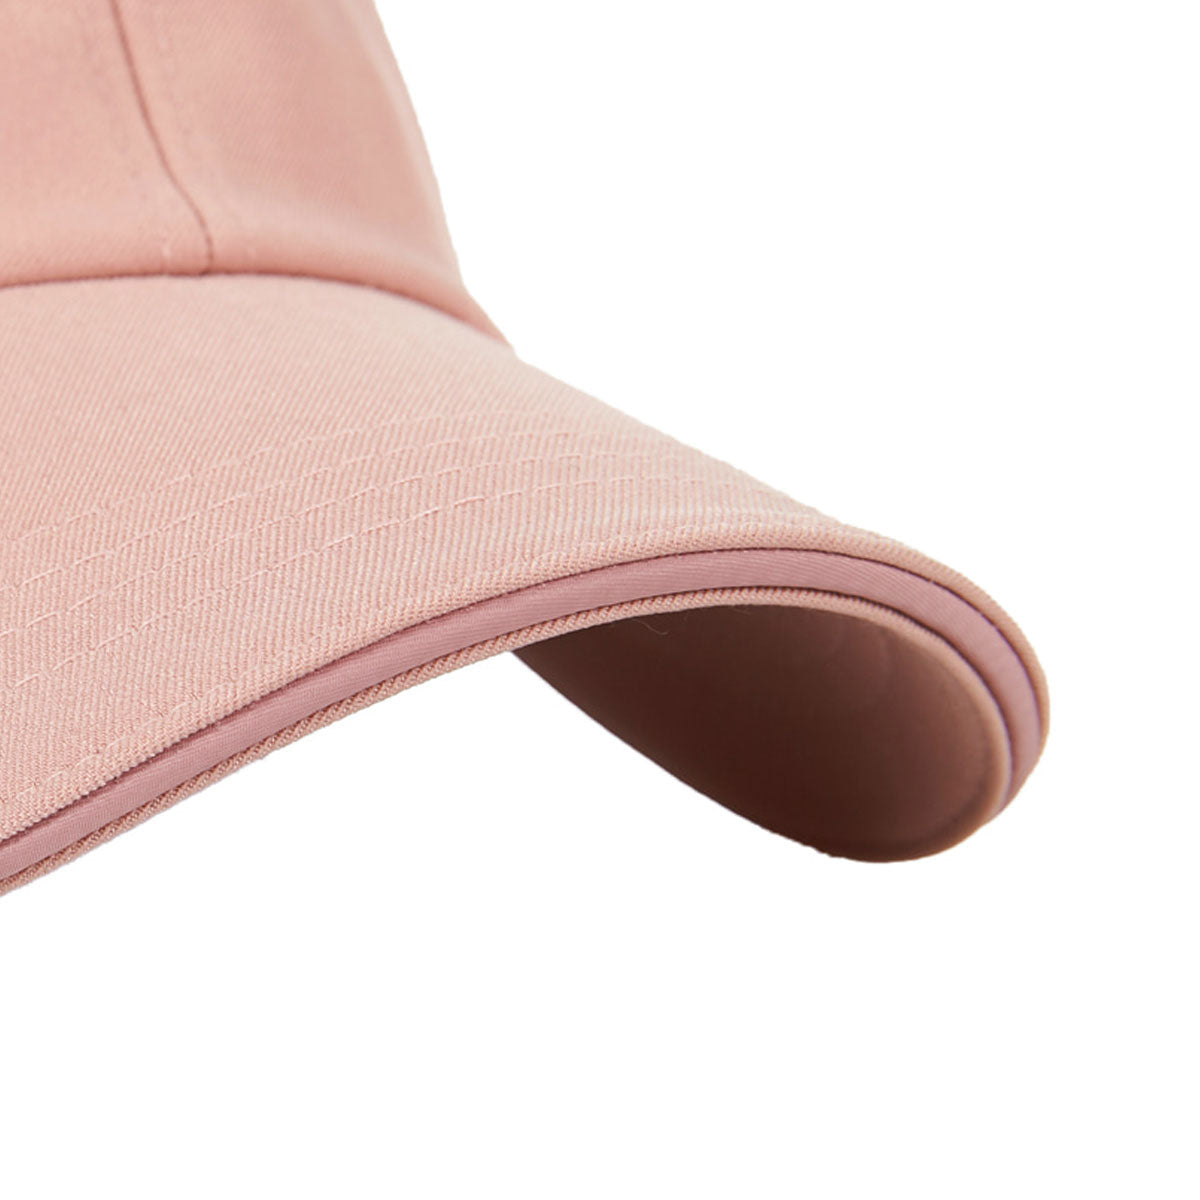 VARZAR - SILVER STUD OVER FIT BALL CAP PINK [VZR4-0006]